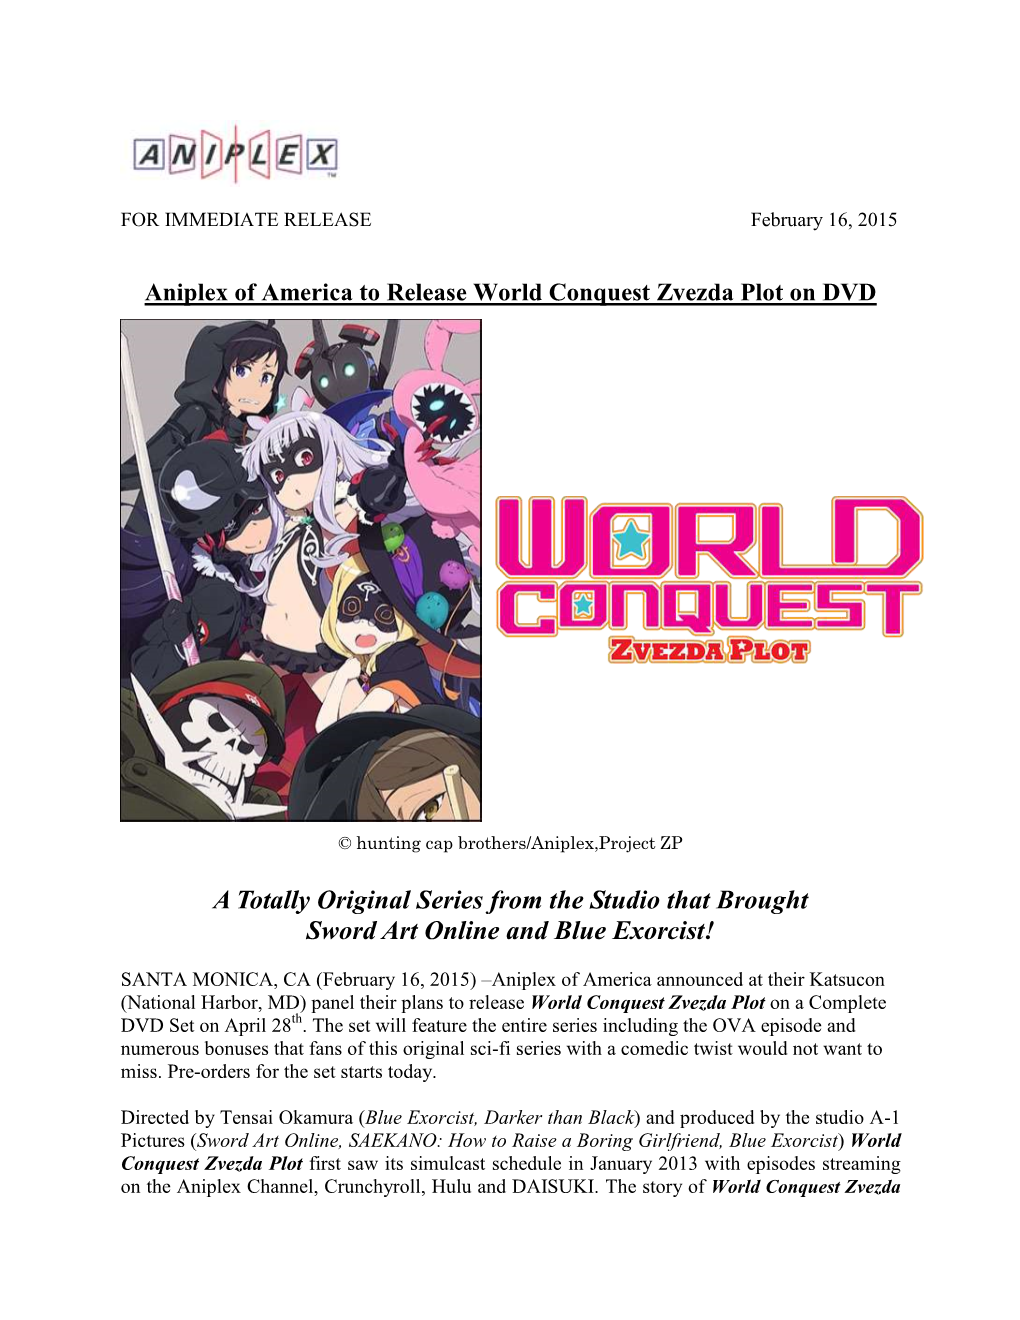 Aniplex of America to Release World Conquest Zvezda Plot on DVD